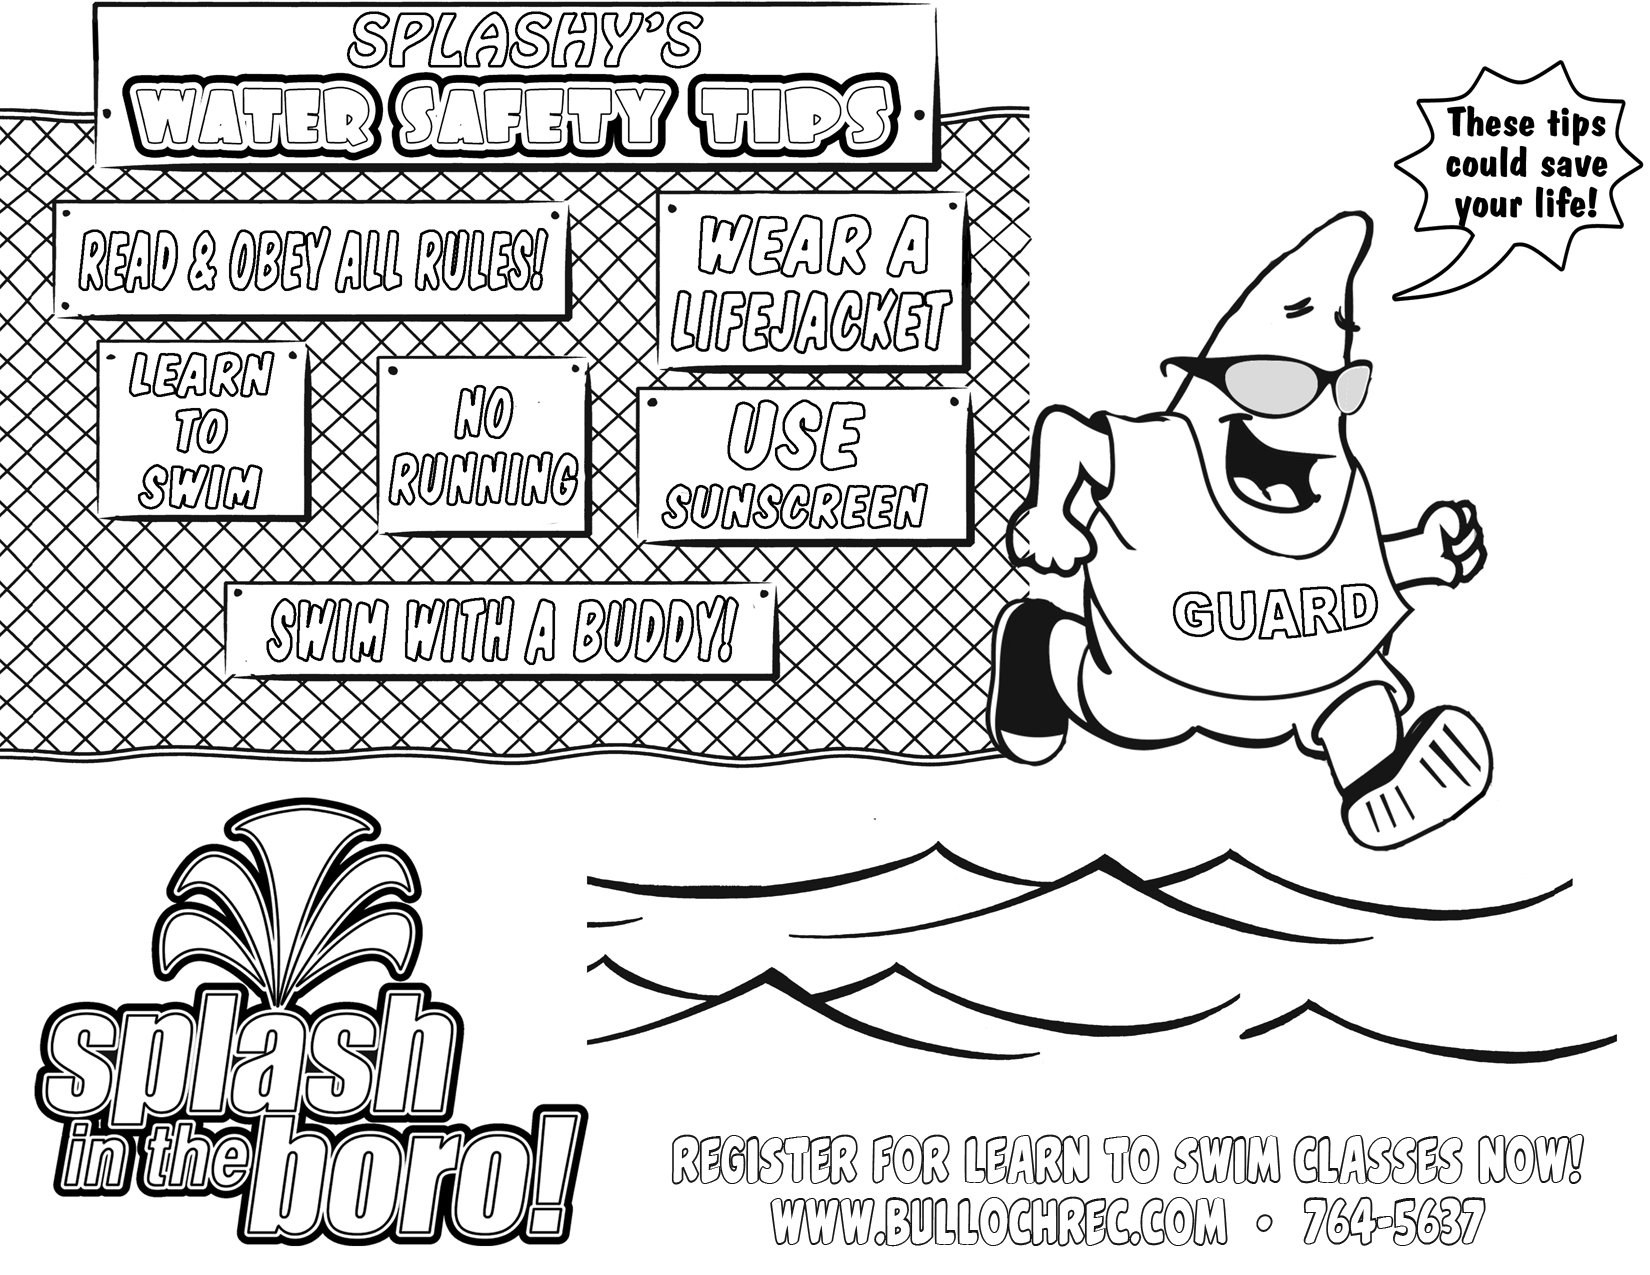 Splash in the boro on x its national coloring book dayso splashy had to join in the fun download print and color these great tips on water safety httpstcoxvuaqkyt x